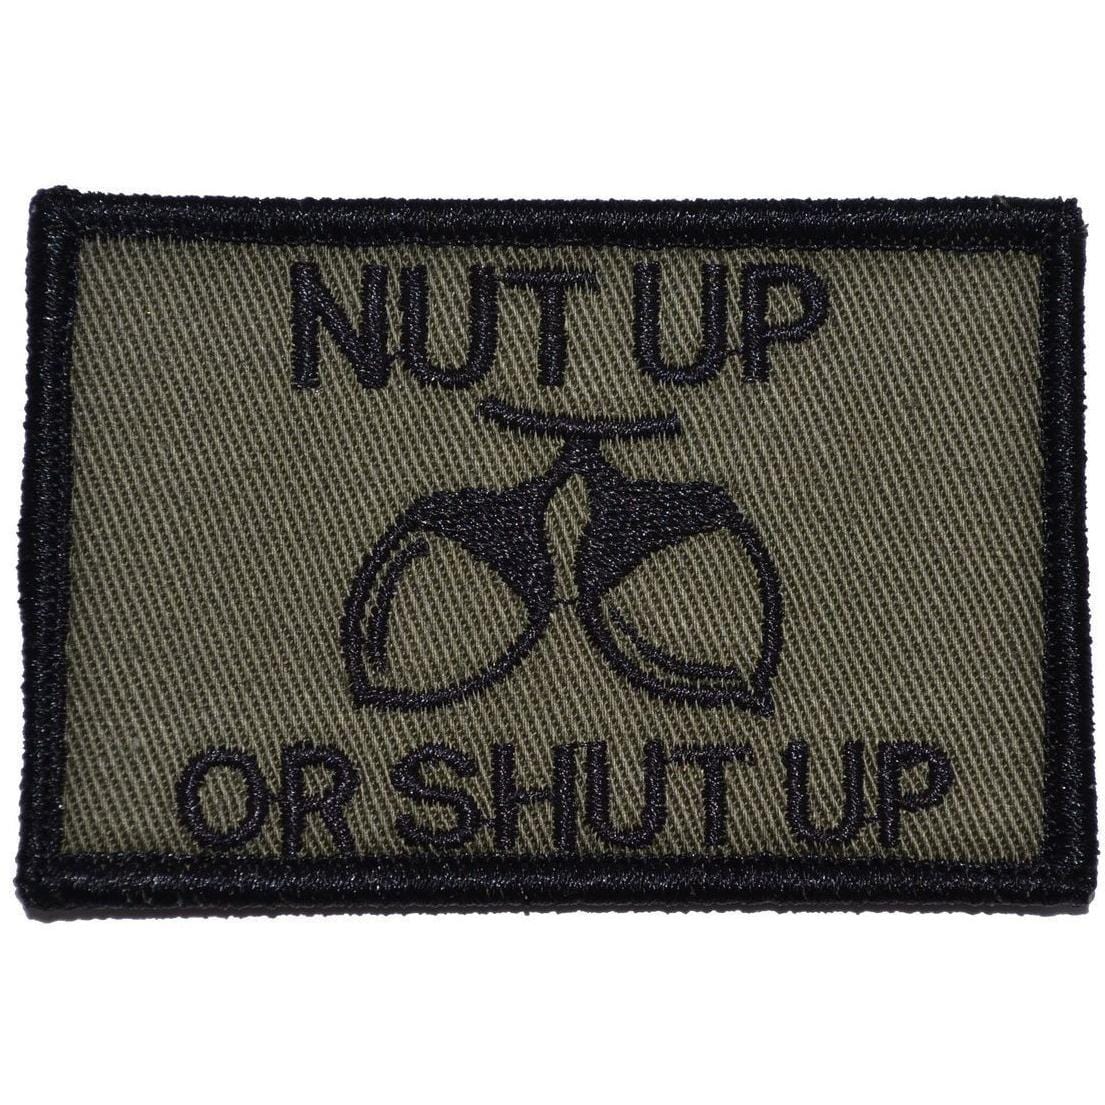 Tactical Gear Junkie Patches Olive Drab Nut Up or Shut Up - 2x3 Patch